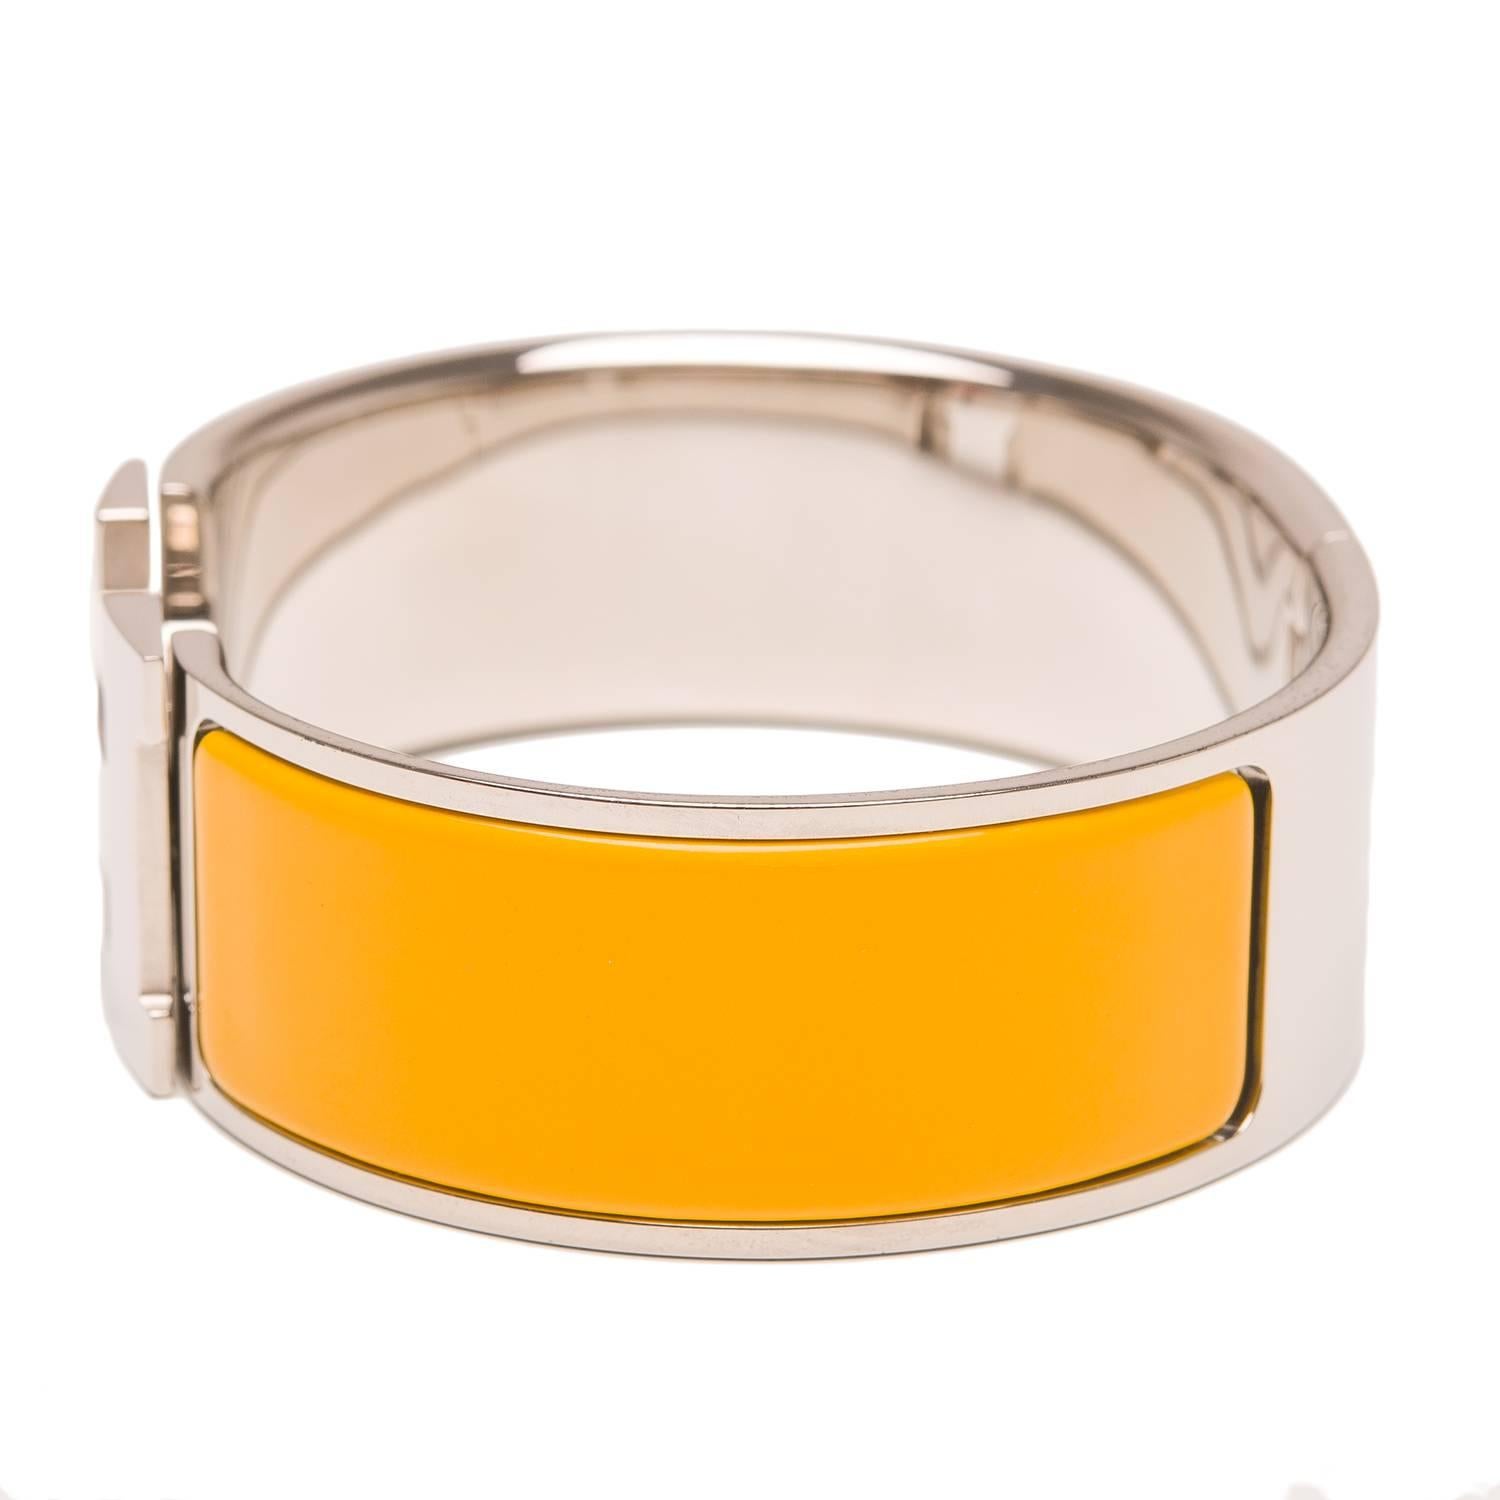 Hermes wide Clic Clac H bracelet in Mimosa enamel with palladium plated hardware in size PM.

Origin: France

Condition: Never Carried

Accompanied by: Hermes box

Measurements: Diameter: 2.25"; Circumference: 7.5"; Width: 1"